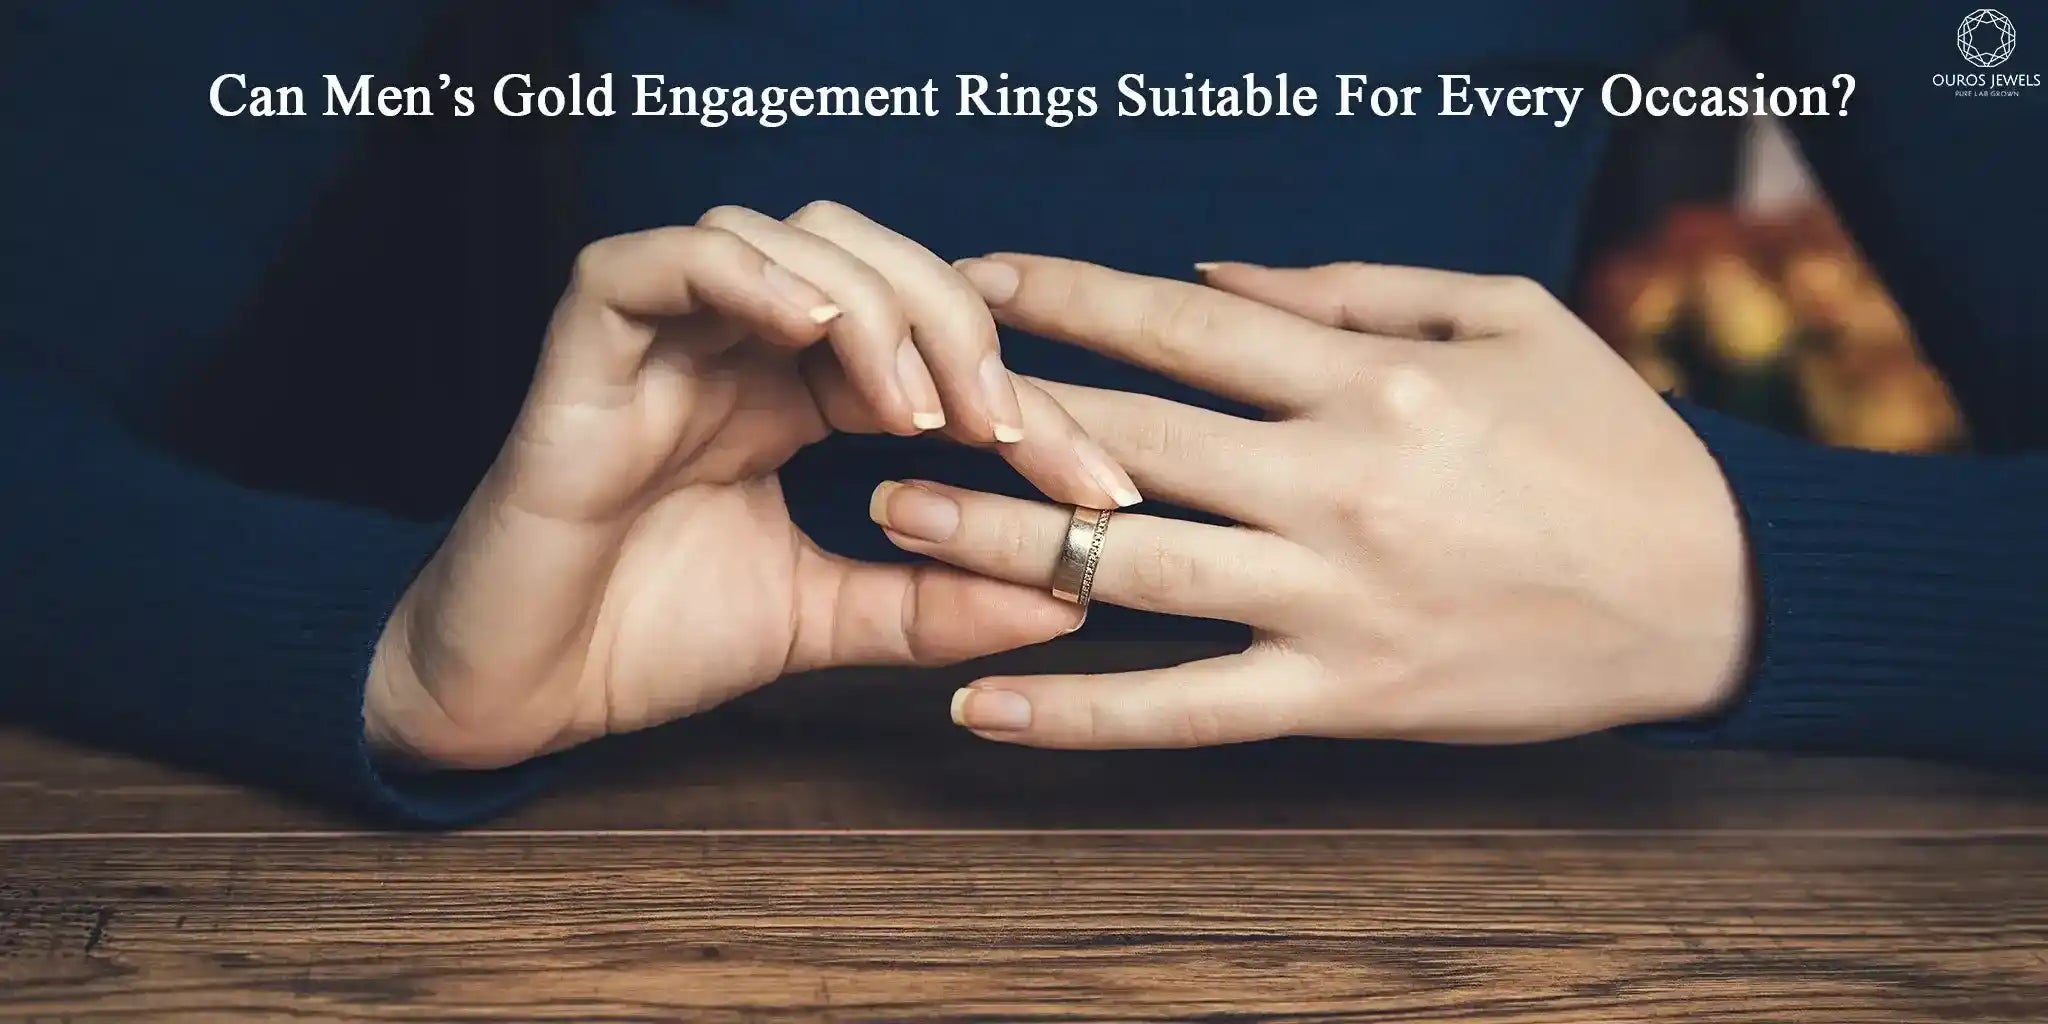 Mens gold engagement rings to select as a love sign for a showing commitment